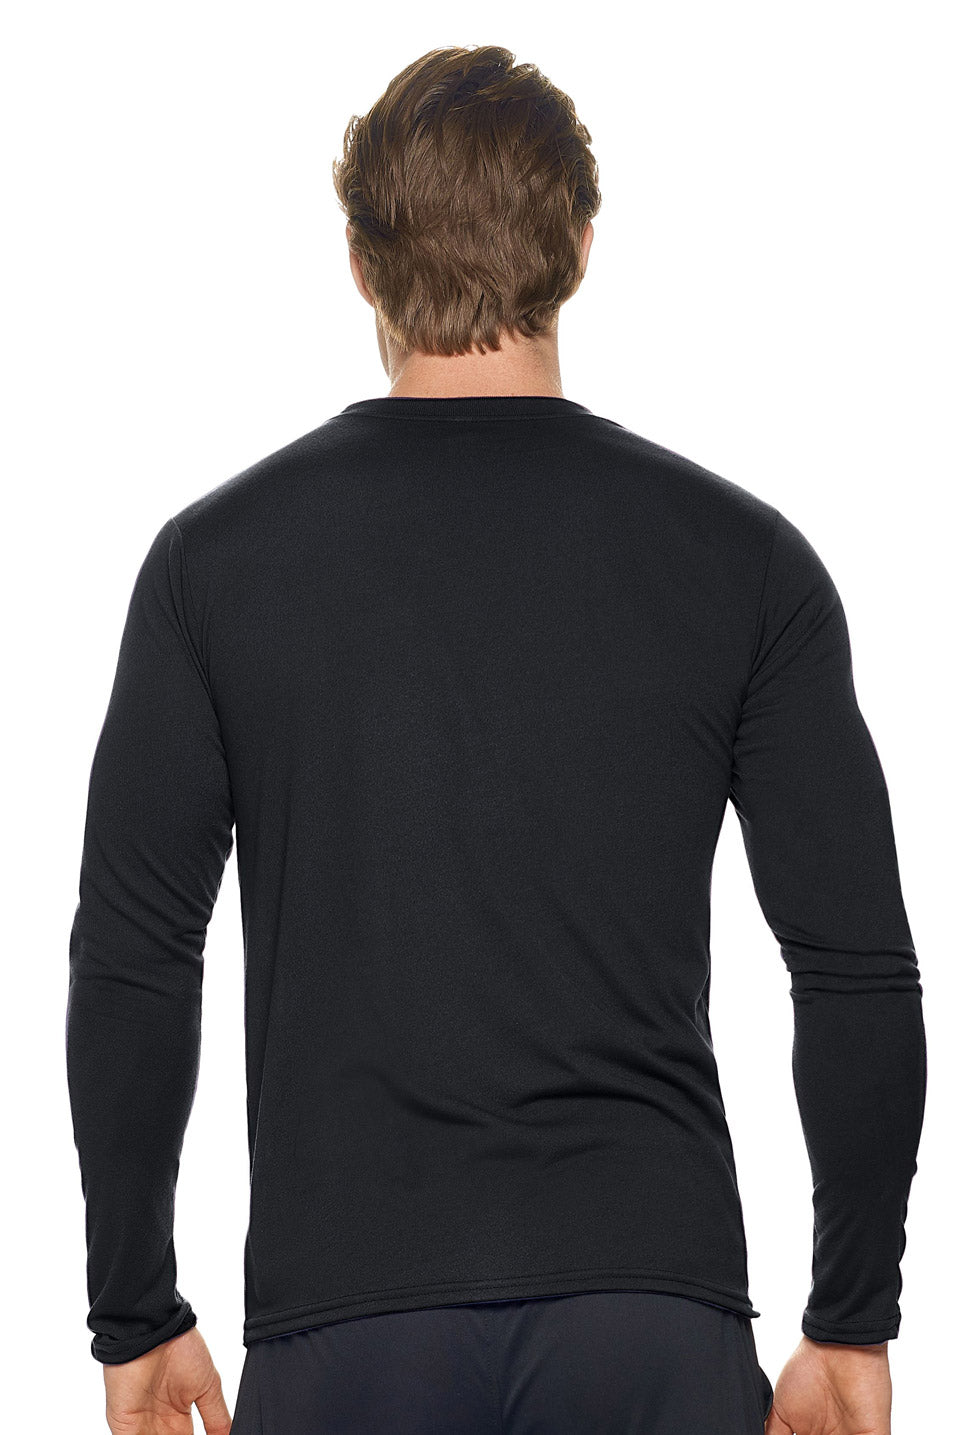 Expert Brand Wholesale Blanks Unisex Men's Long Sleeve In the Field Work Shirt Made in USA Army Black Image 3#black